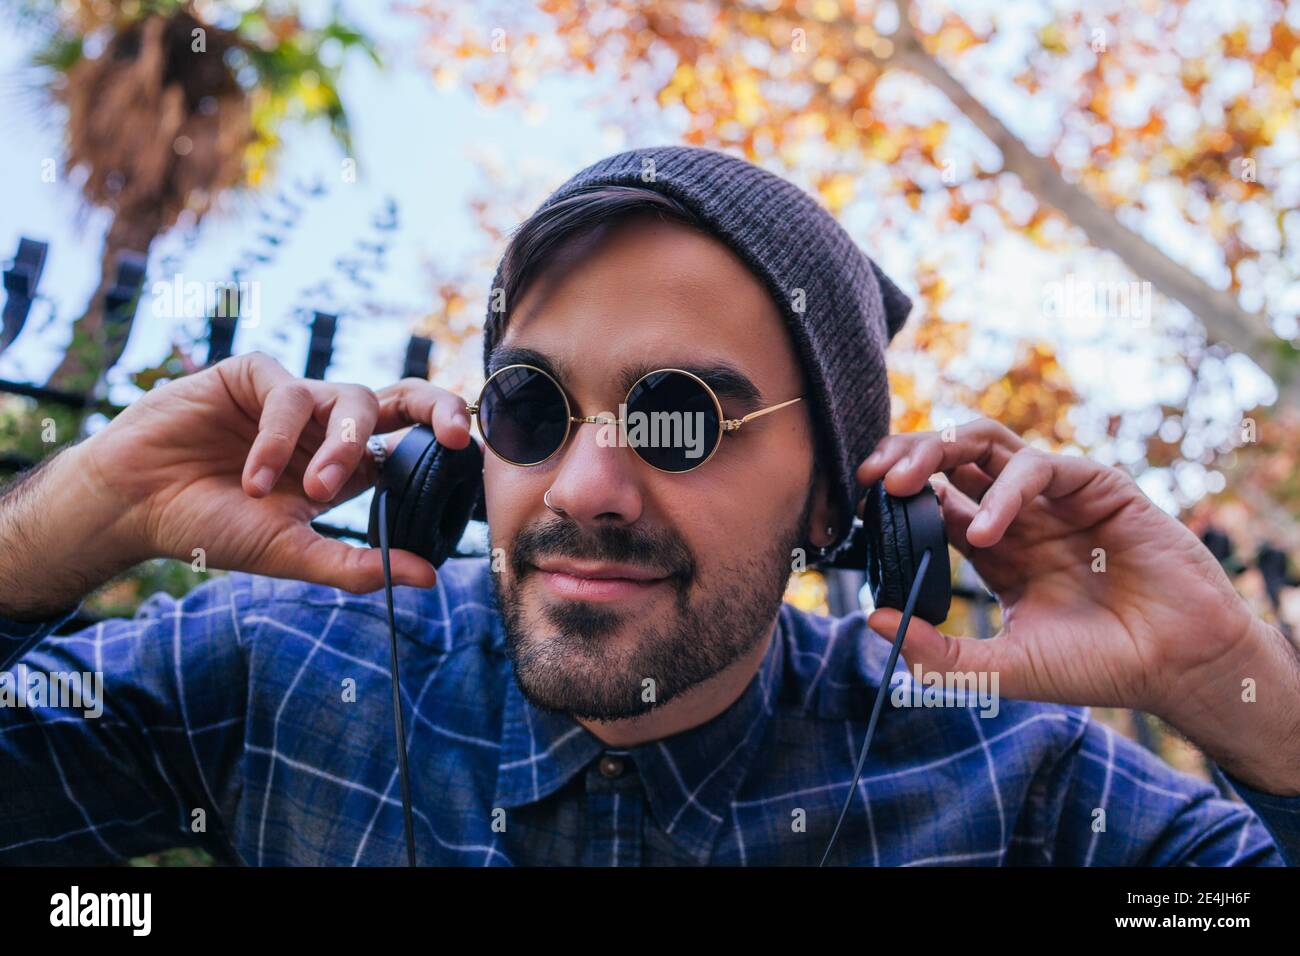 Smiling fashionable man wearing nose ring holding headphones in public park Stock Photo